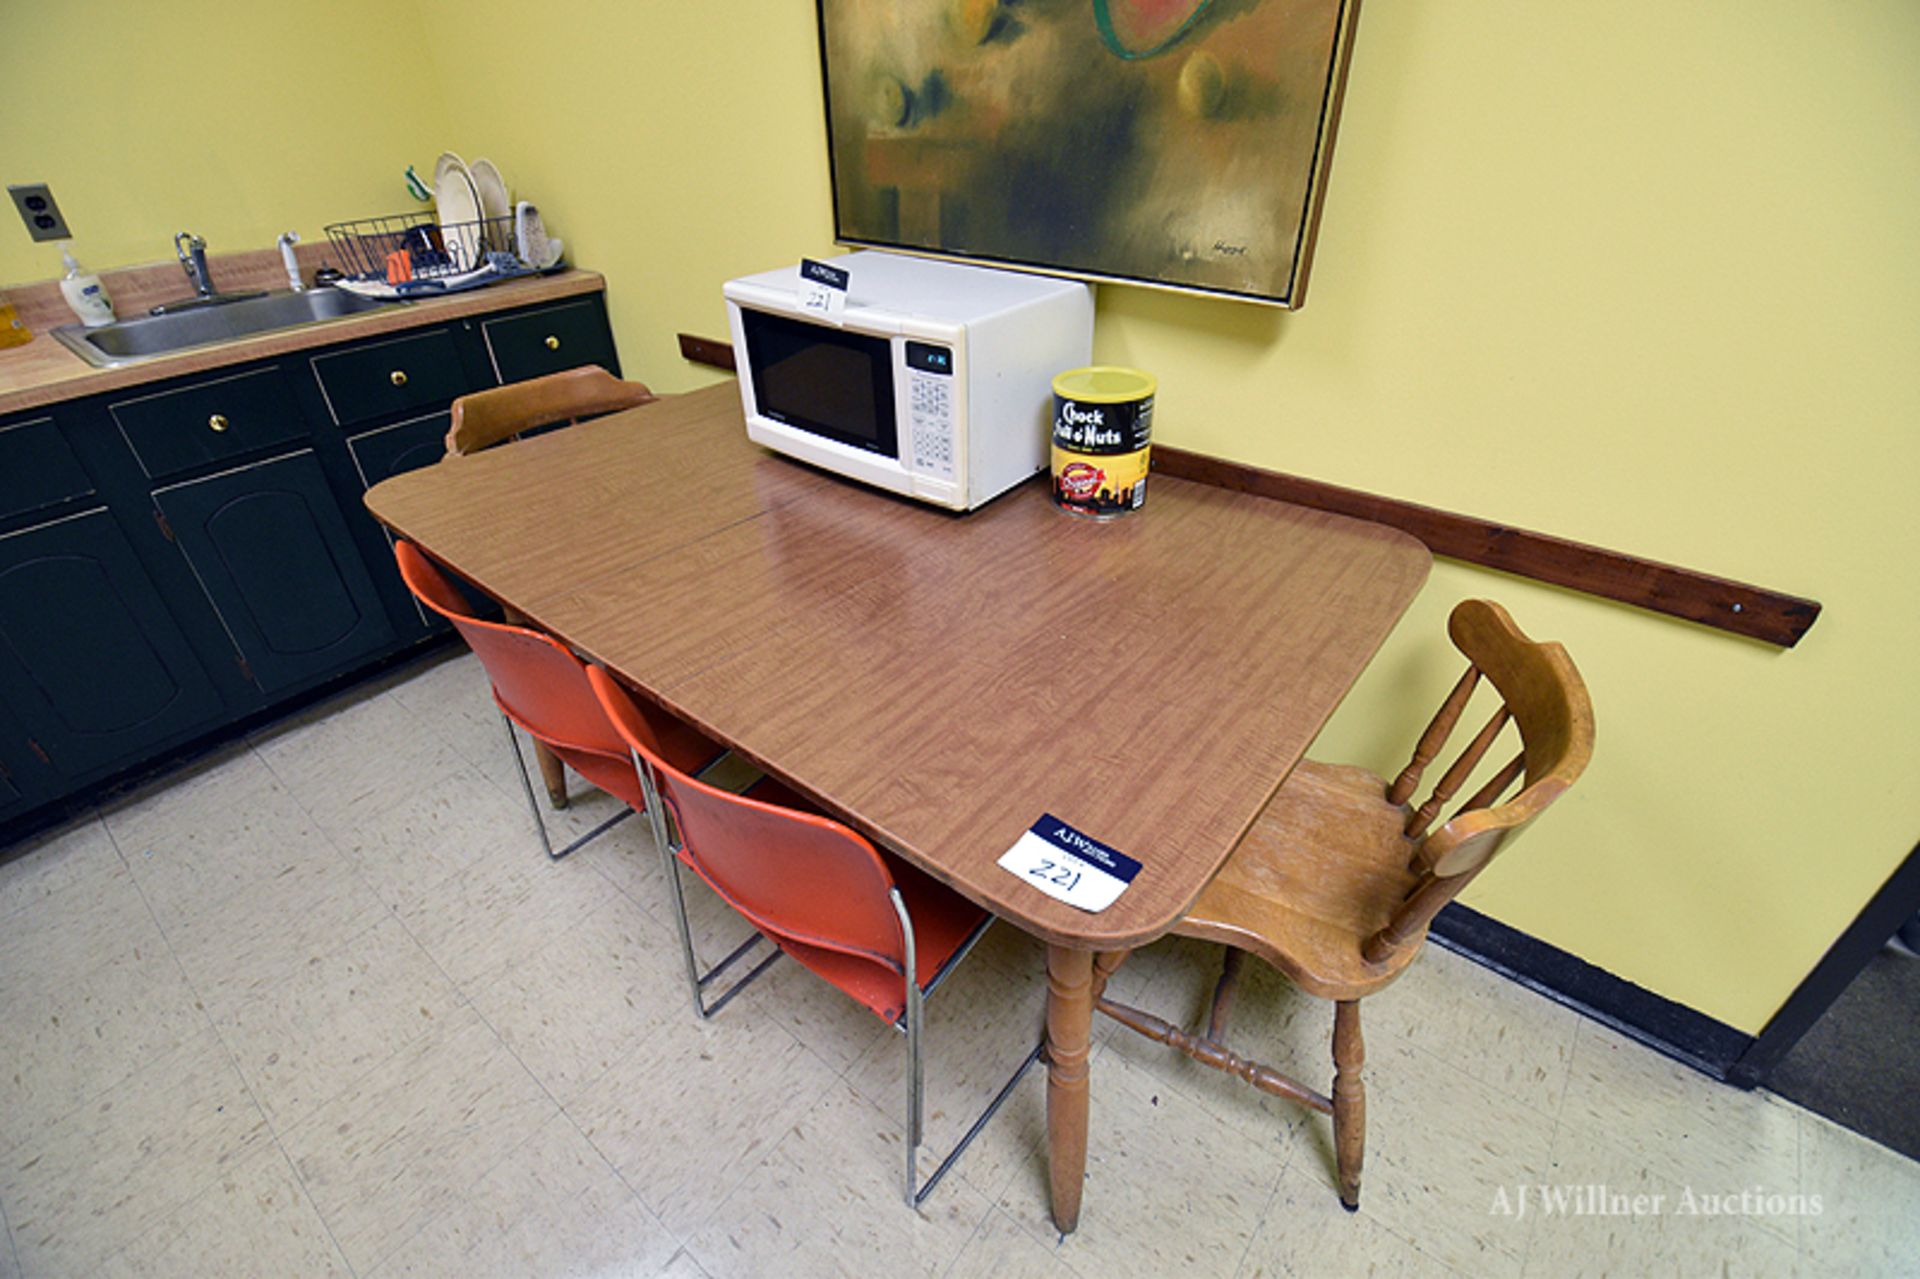 Remaining Contents Of Break Room (Excluding Coffee Maker & Cabinets) - Image 4 of 4